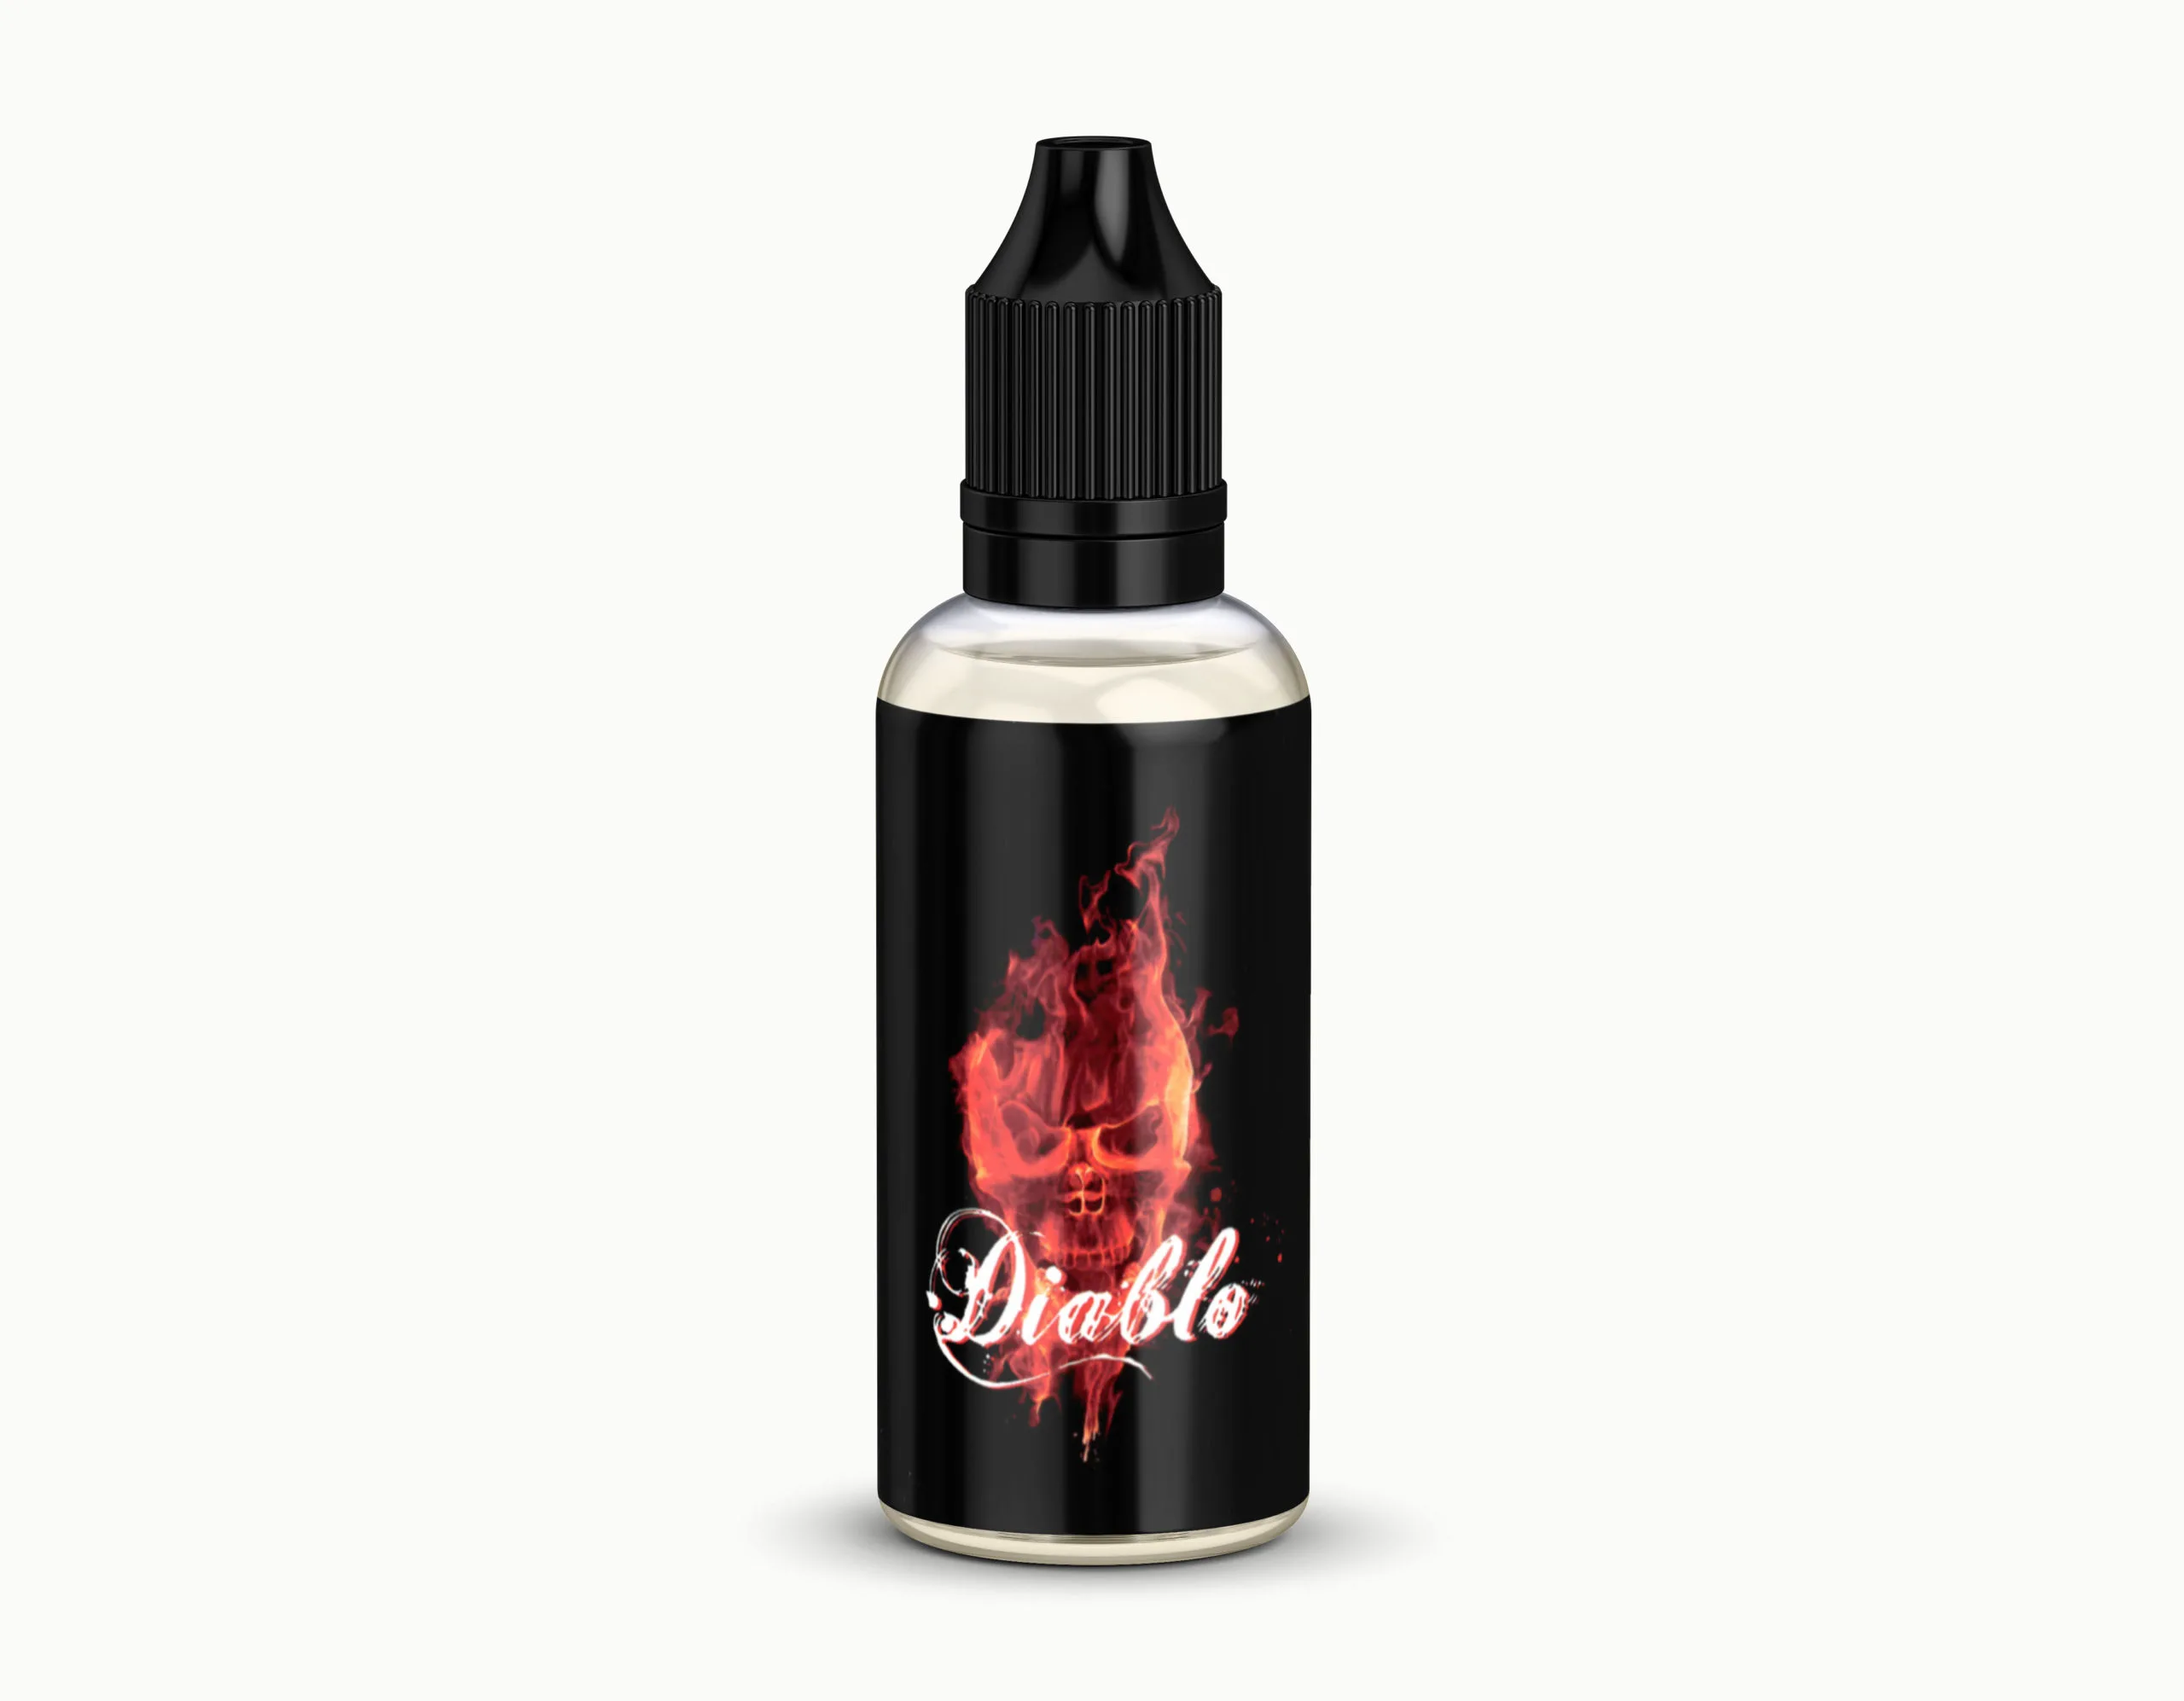 Why the use of Diablo K2 Spray Considered Unsafe?